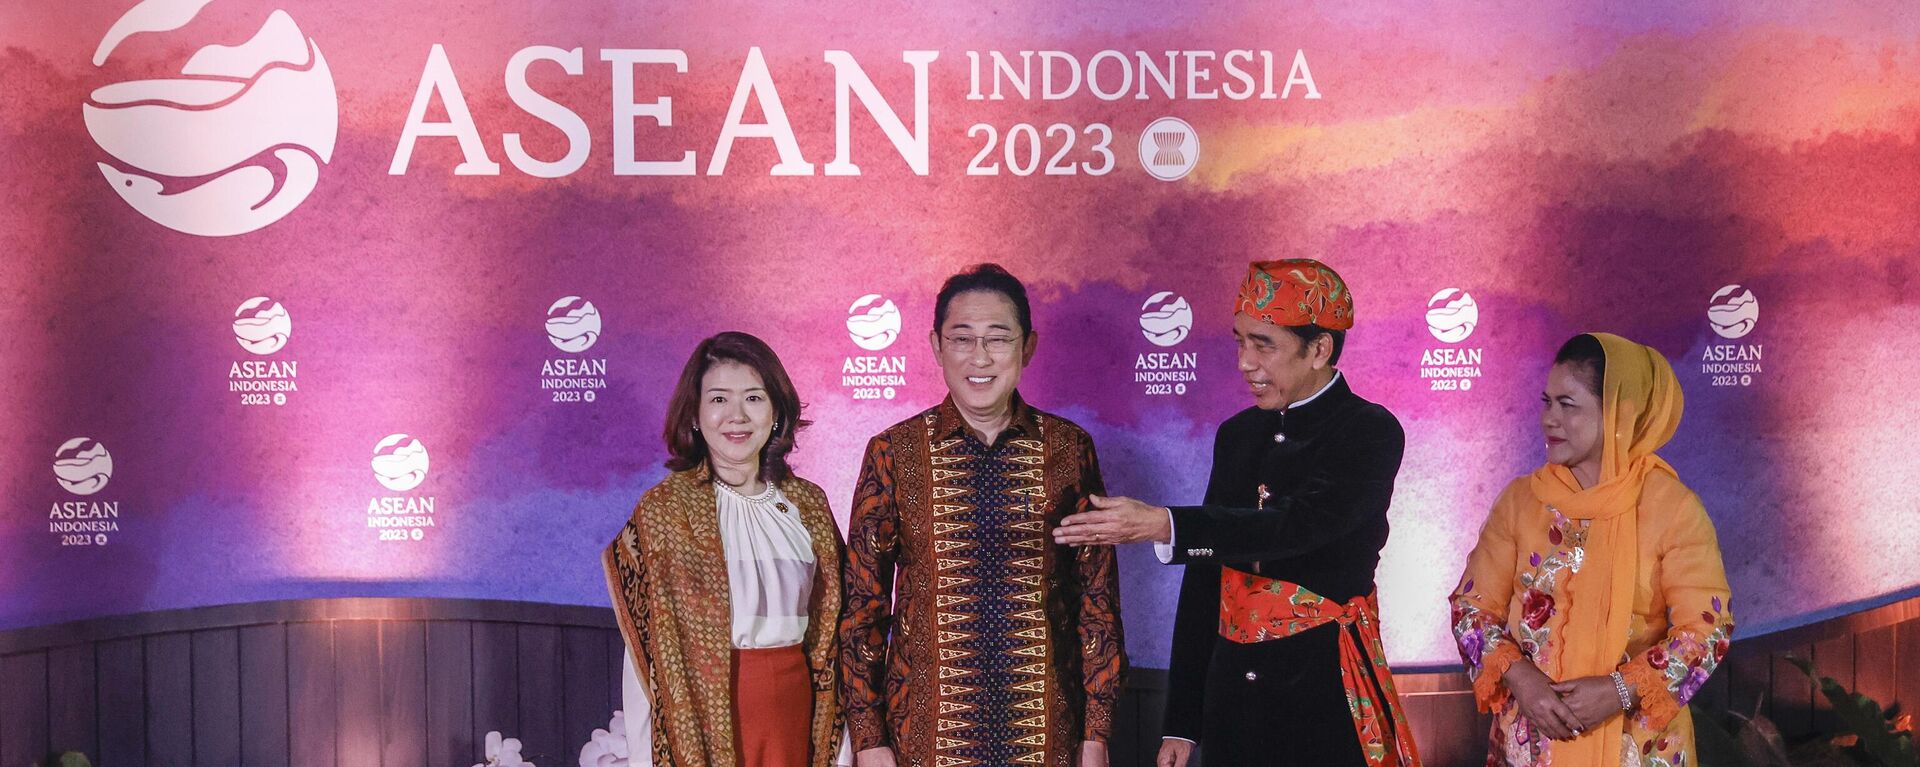 Indonesian President Joko Widodo, second right, and his wife Iriana, right, greet Japan's Prime Minster Fumio Kishida and his wife Yuko upon their arrival for the gala dinner at the ASEAN Summit in Jakarta, Indonesia, Wednesday, Sept. 6, 2023. - Sputnik International, 1920, 07.09.2023